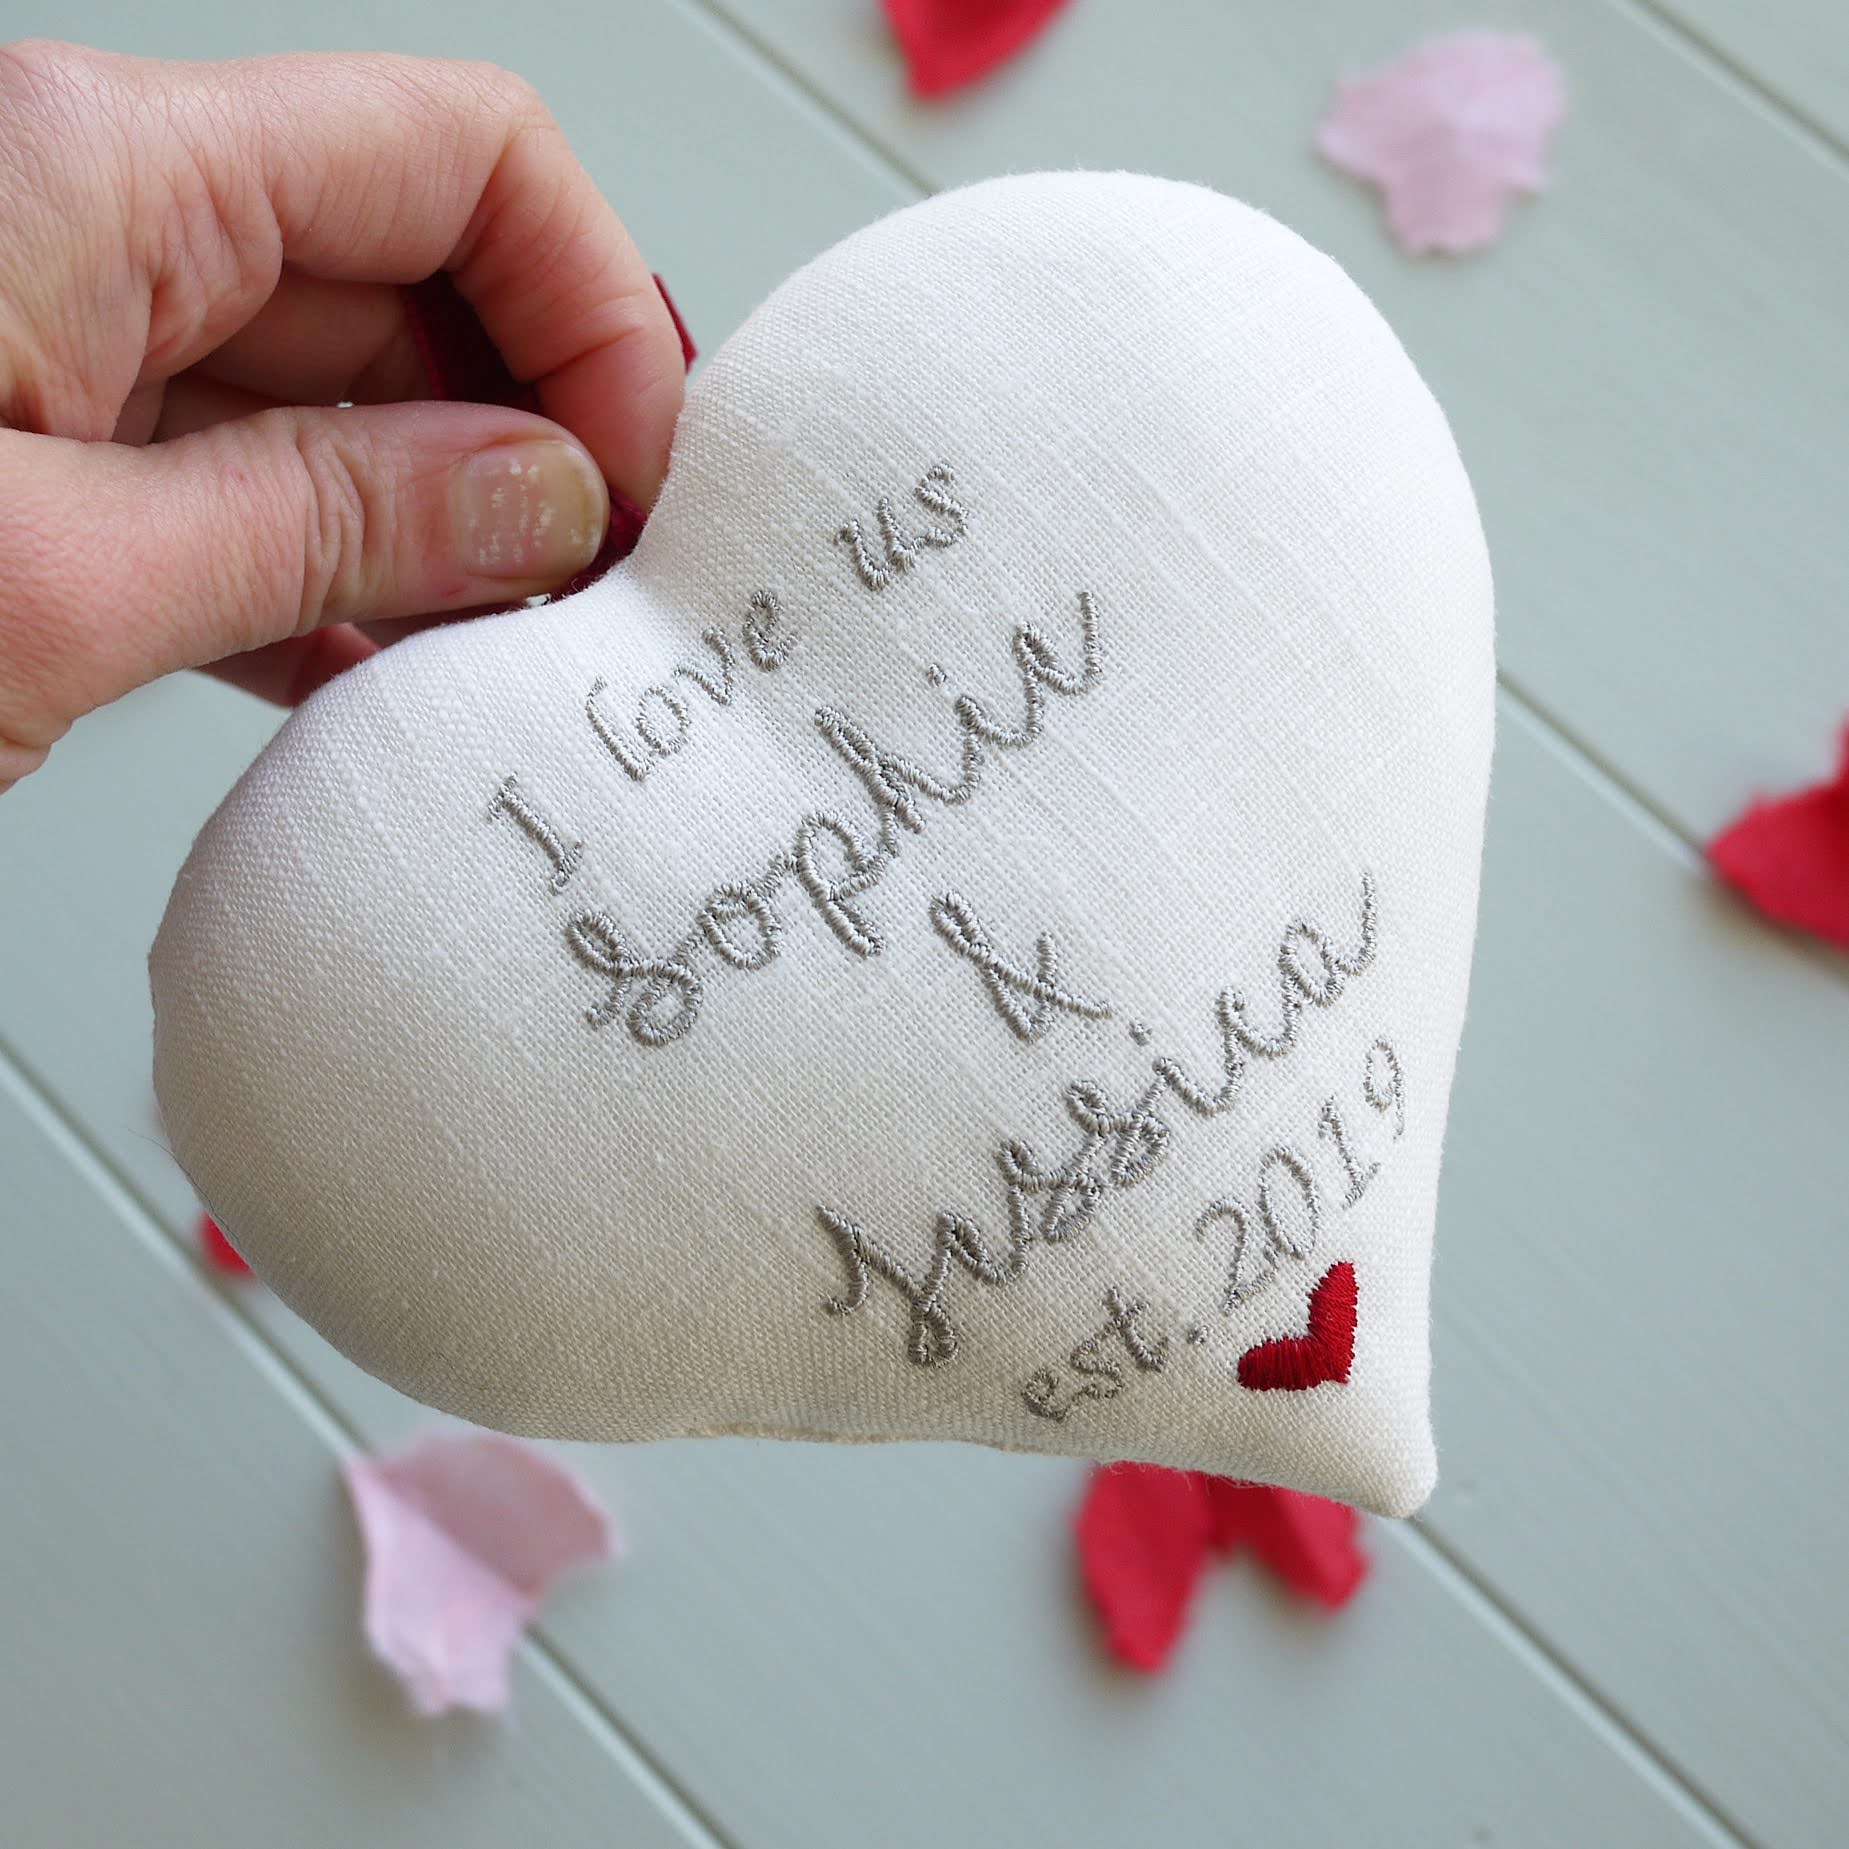 Valentines Day ’I Love Us’ Gift Heart with Tiny Photo Frame Prep collection